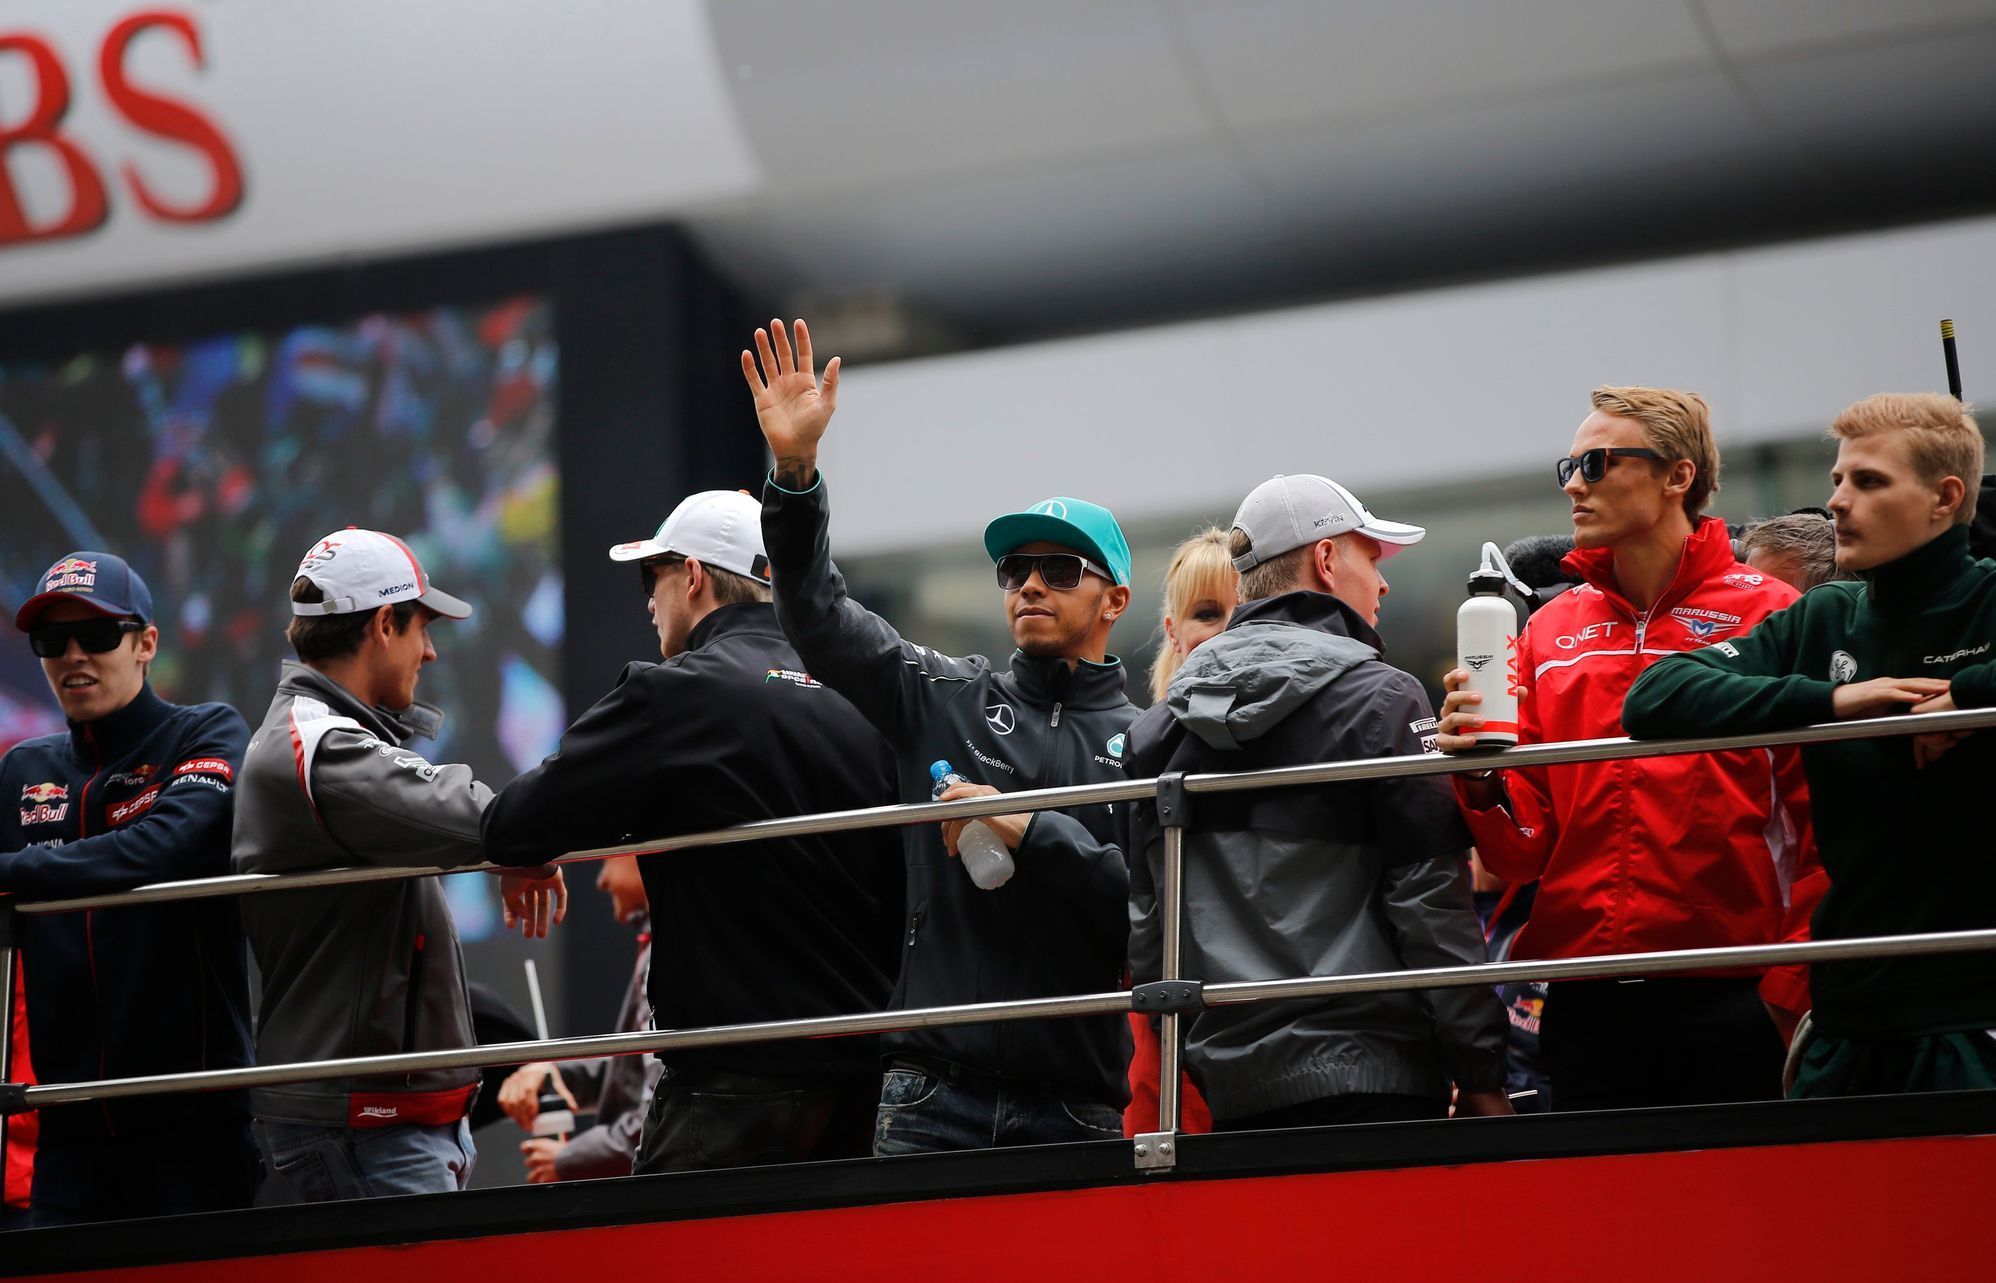 Mercedes Formula One driver Hamilton of Britain waves from a bus during the drivers' parade before the Chinese F1 Grand Prix at the Shanghai International circuit